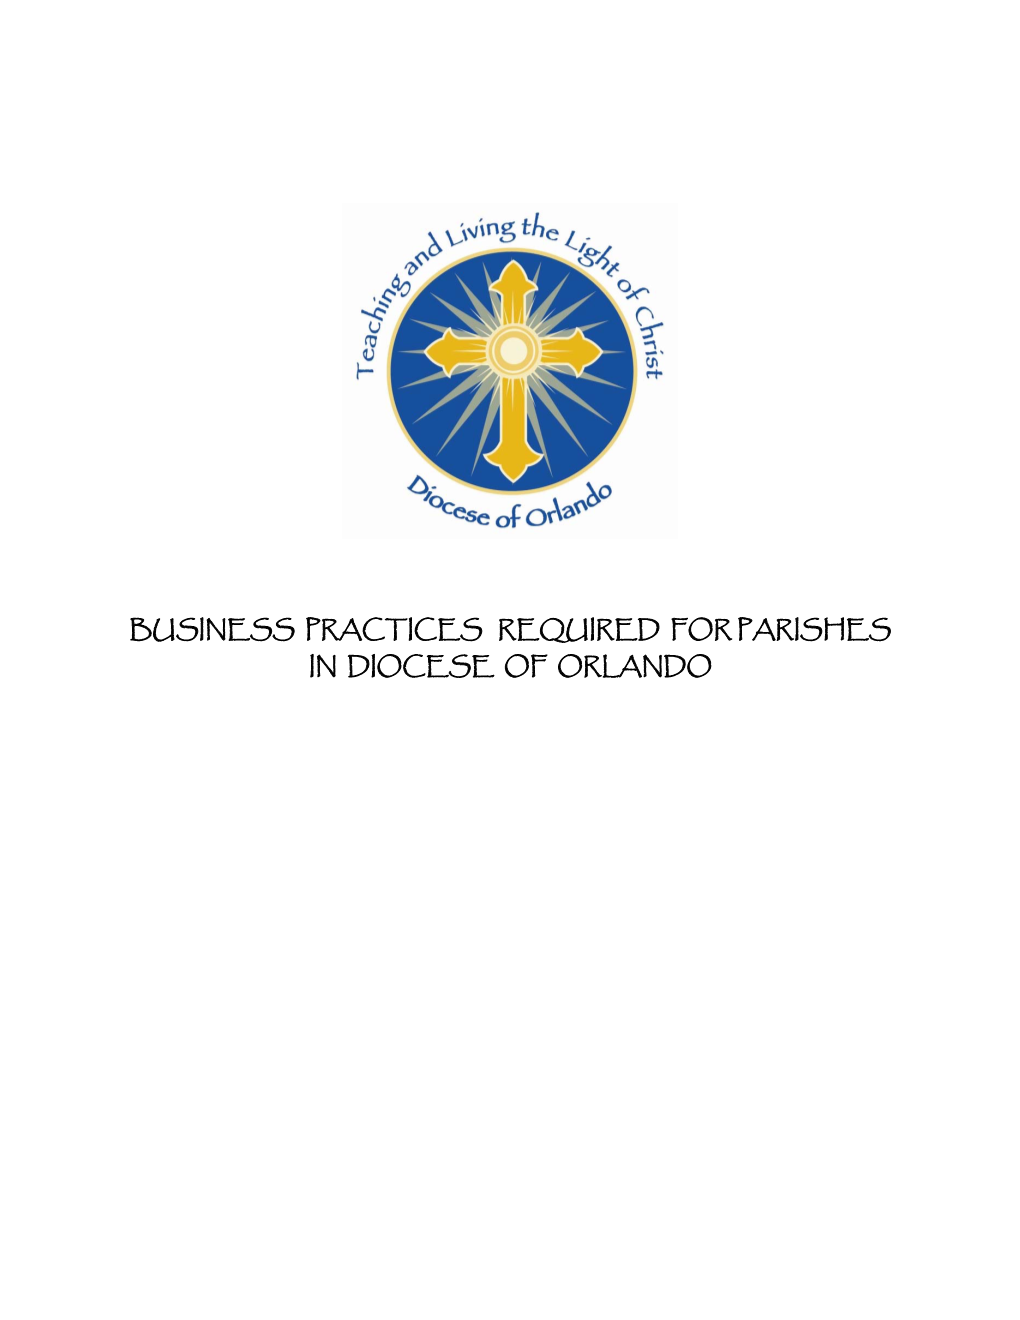 Business Practices Required for Parishes in Diocese of Orlando